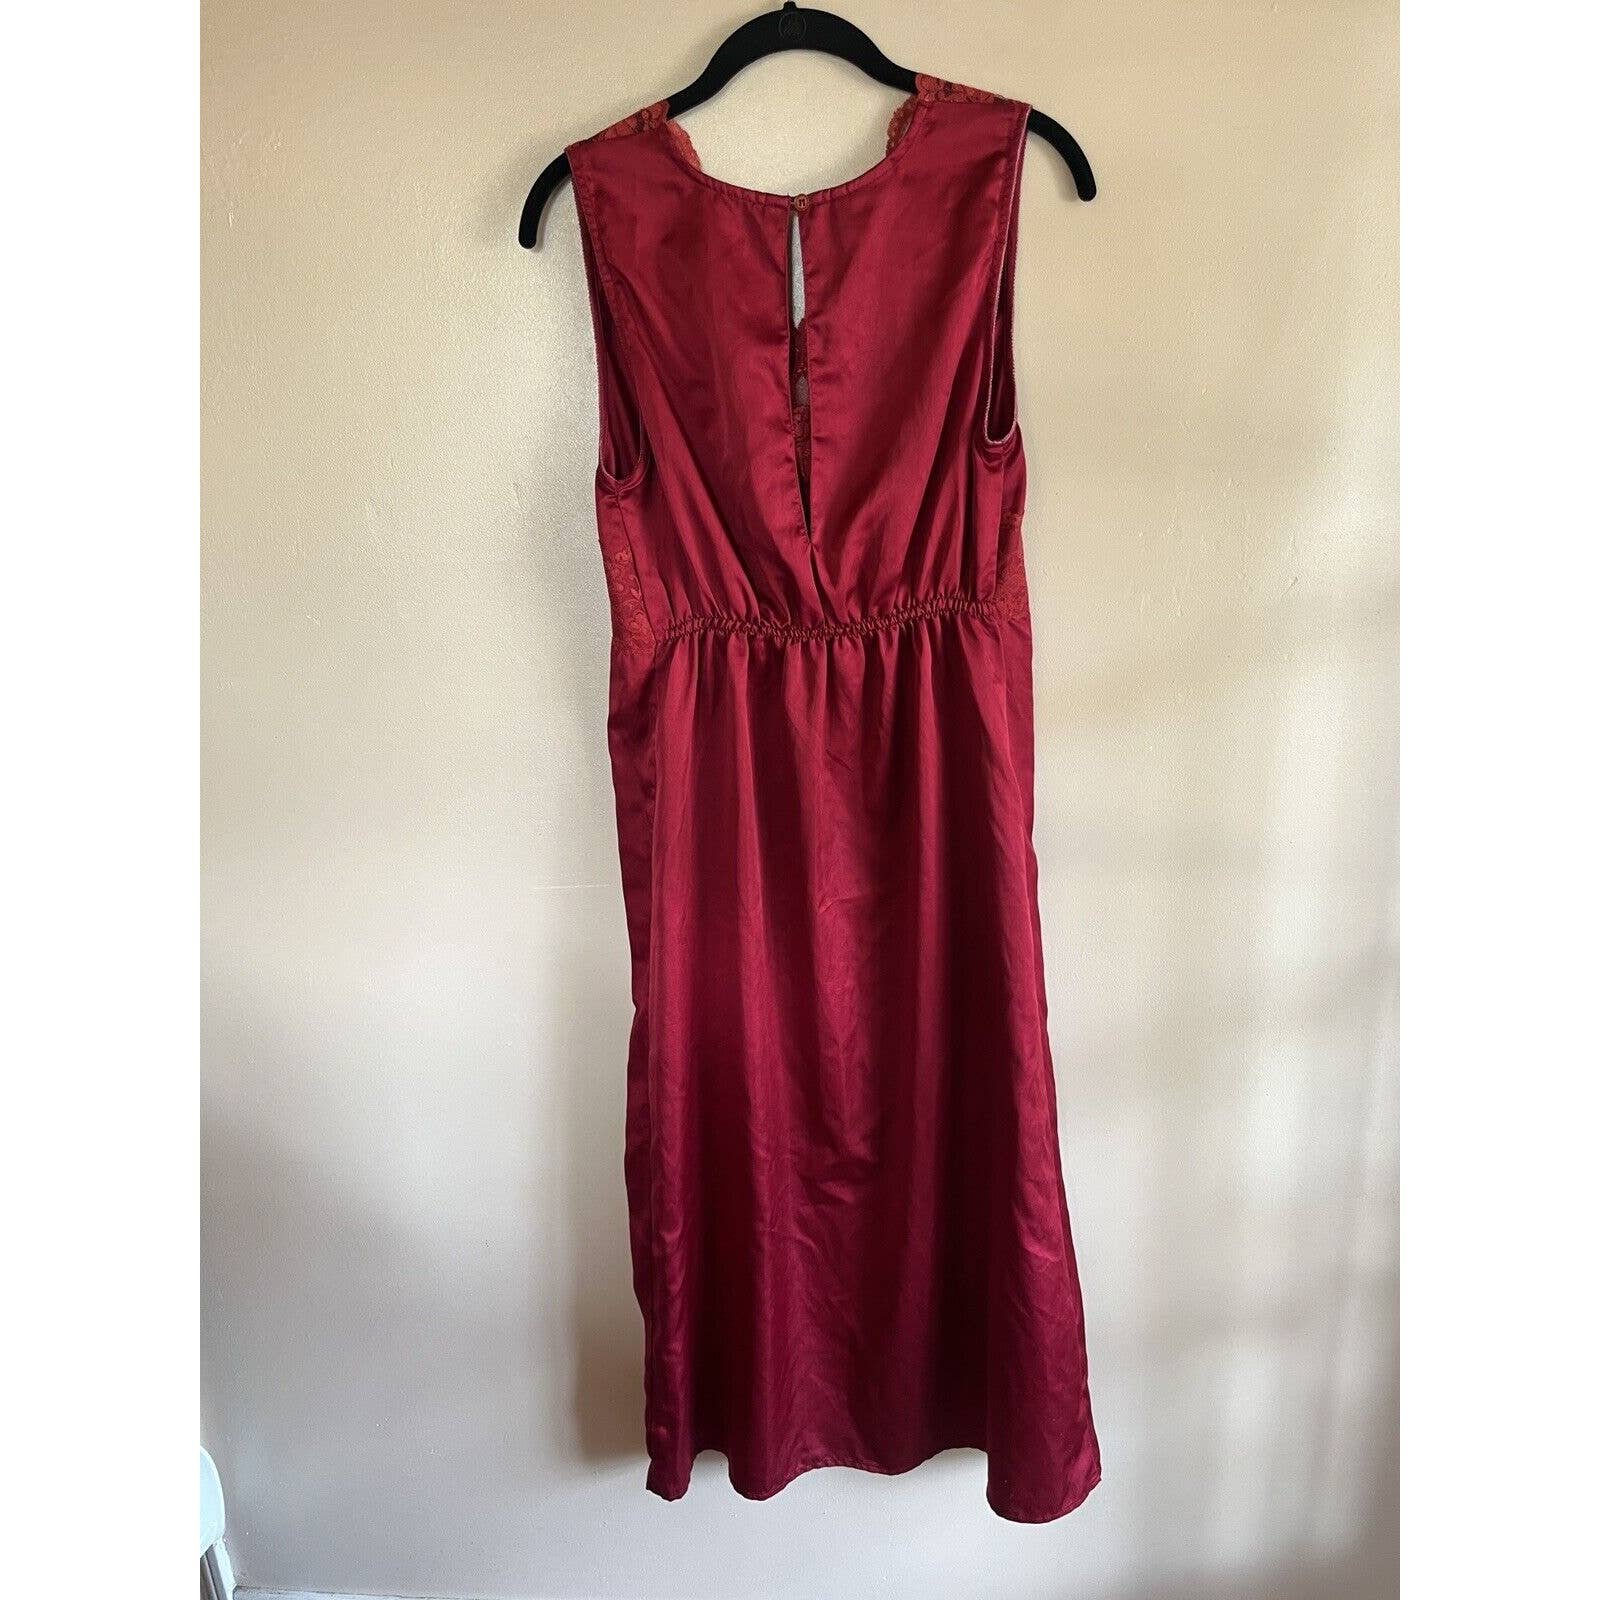 save up to 70% Vintage MEDIUM Otto Burlington Silky Lacey Nightgown Red Slip Dress Gown P7ssGjg8j outlet online shop